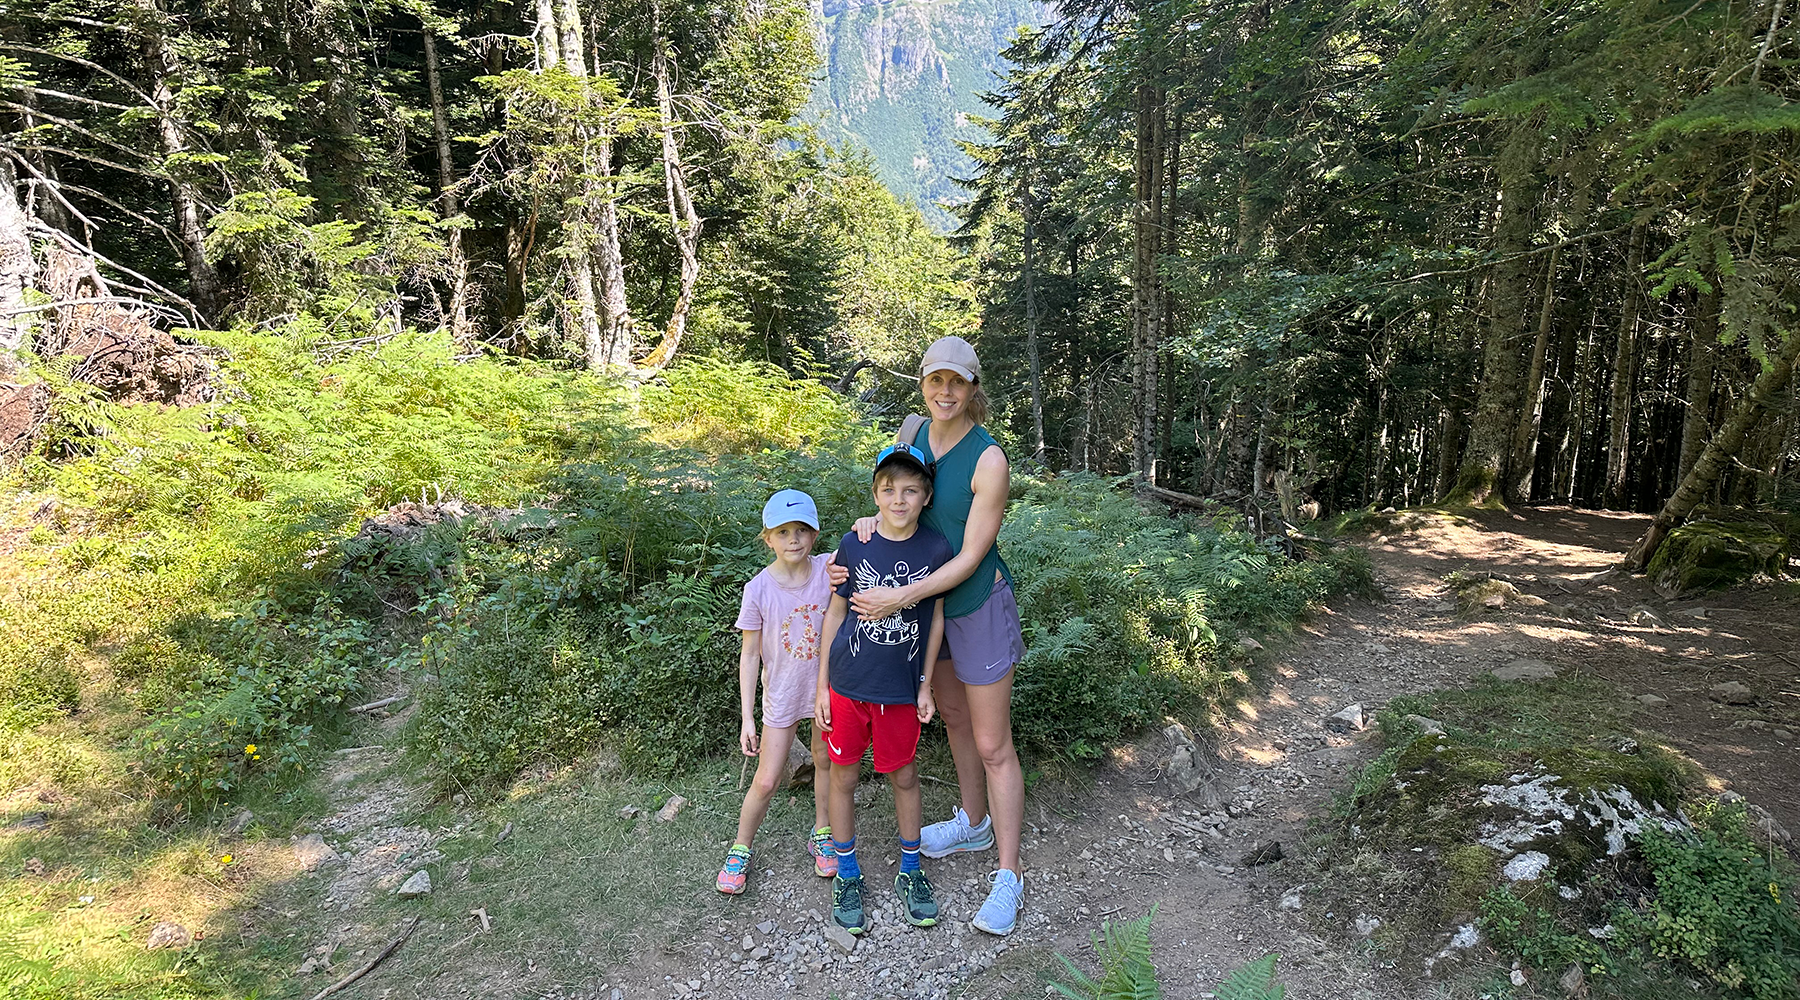 Photo of Lee and her children enjoying time in nature.